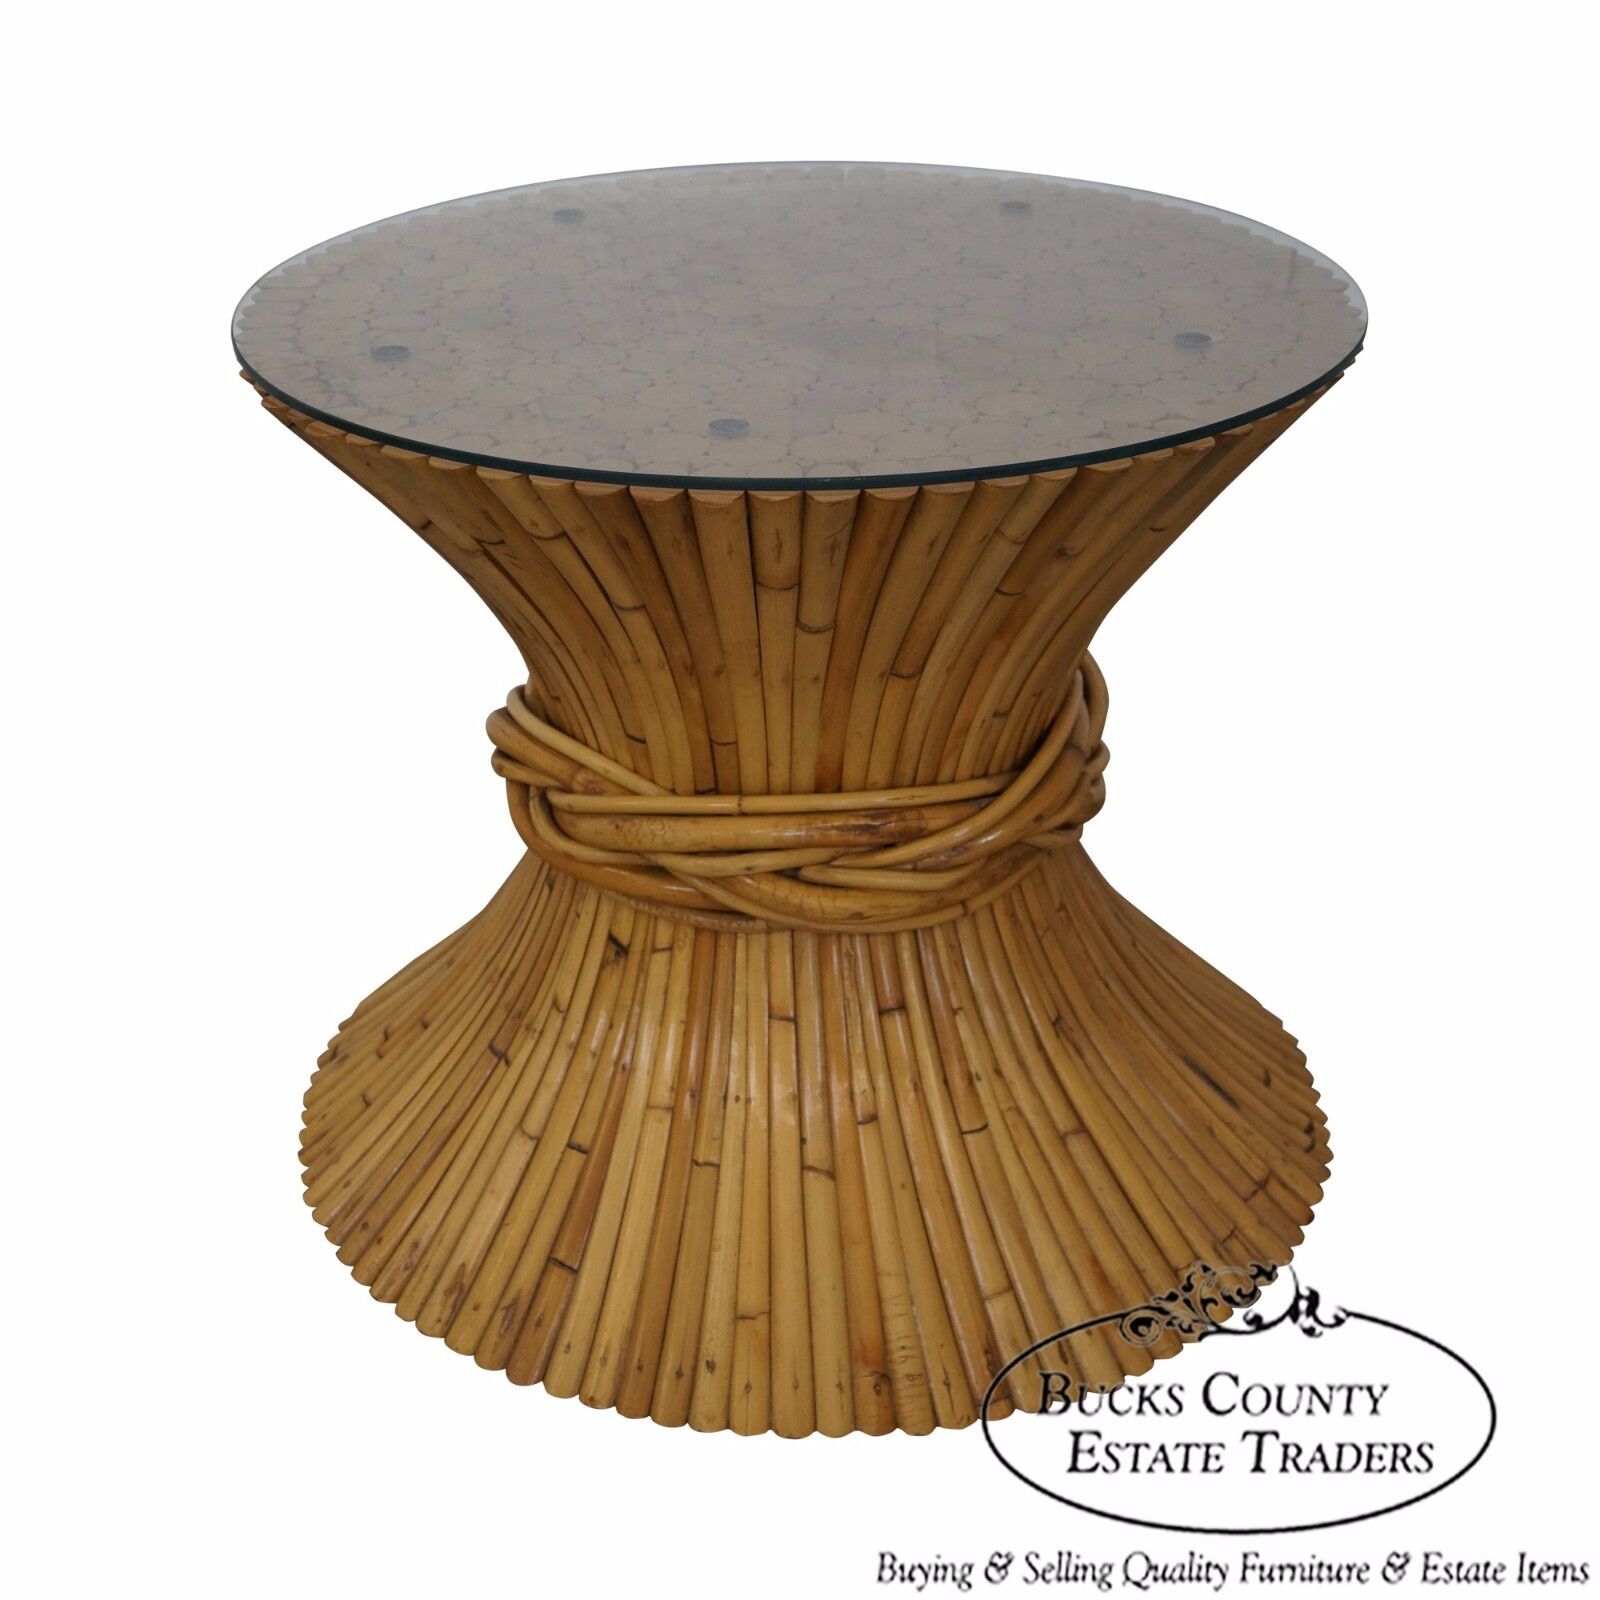 McGuire Sheaf of Wheat Bamboo Rattan Round Glass Top Coffee Table